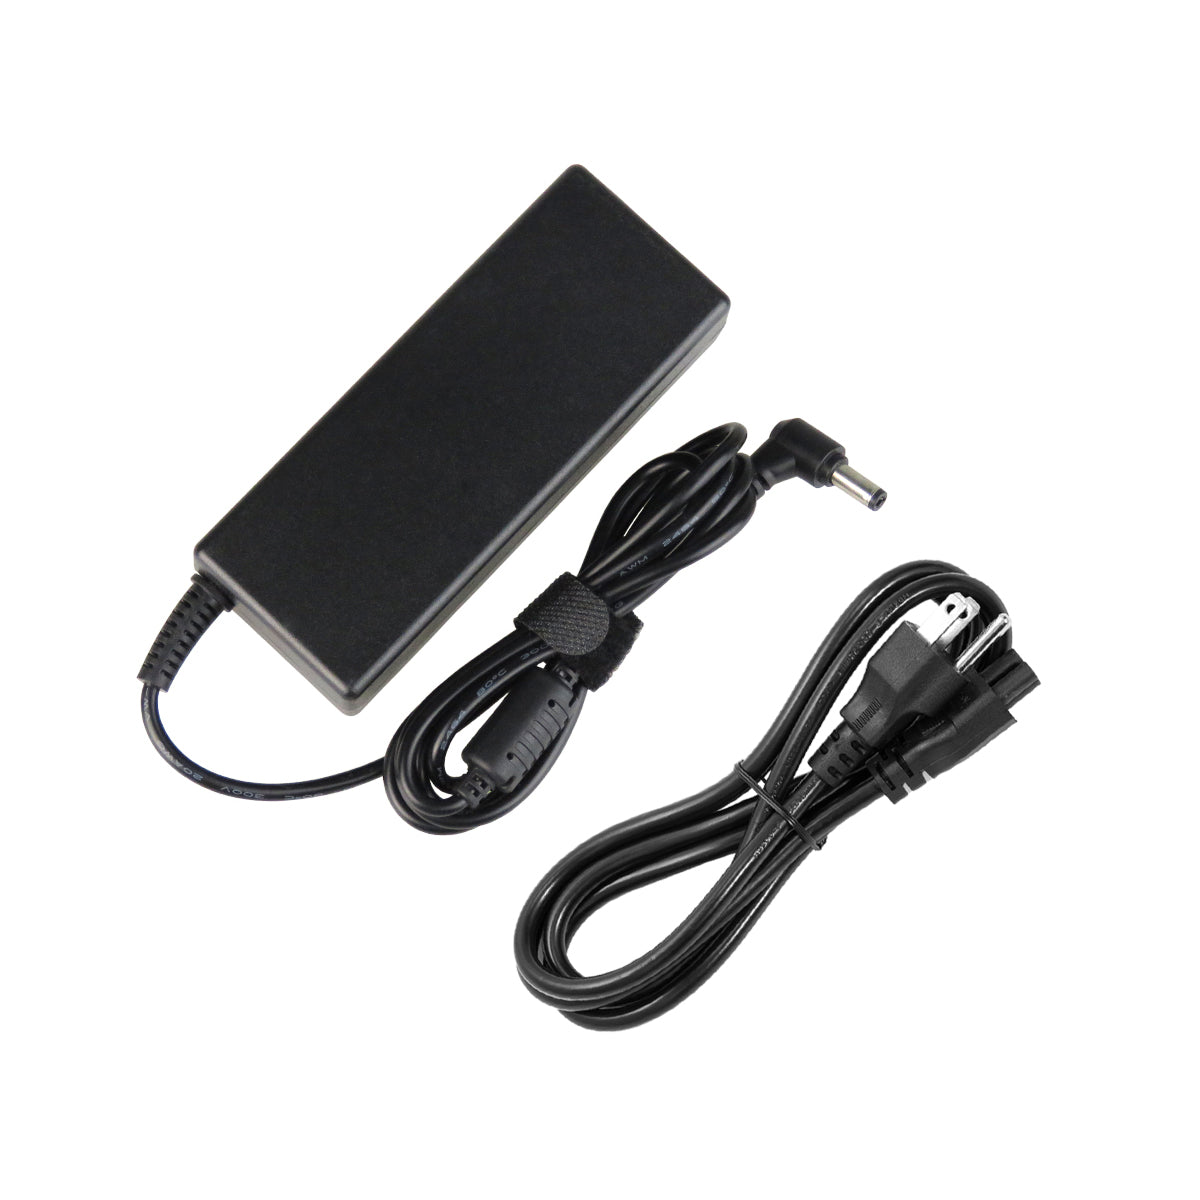 AC Adapter Charger for ASUS A54C Notebook.